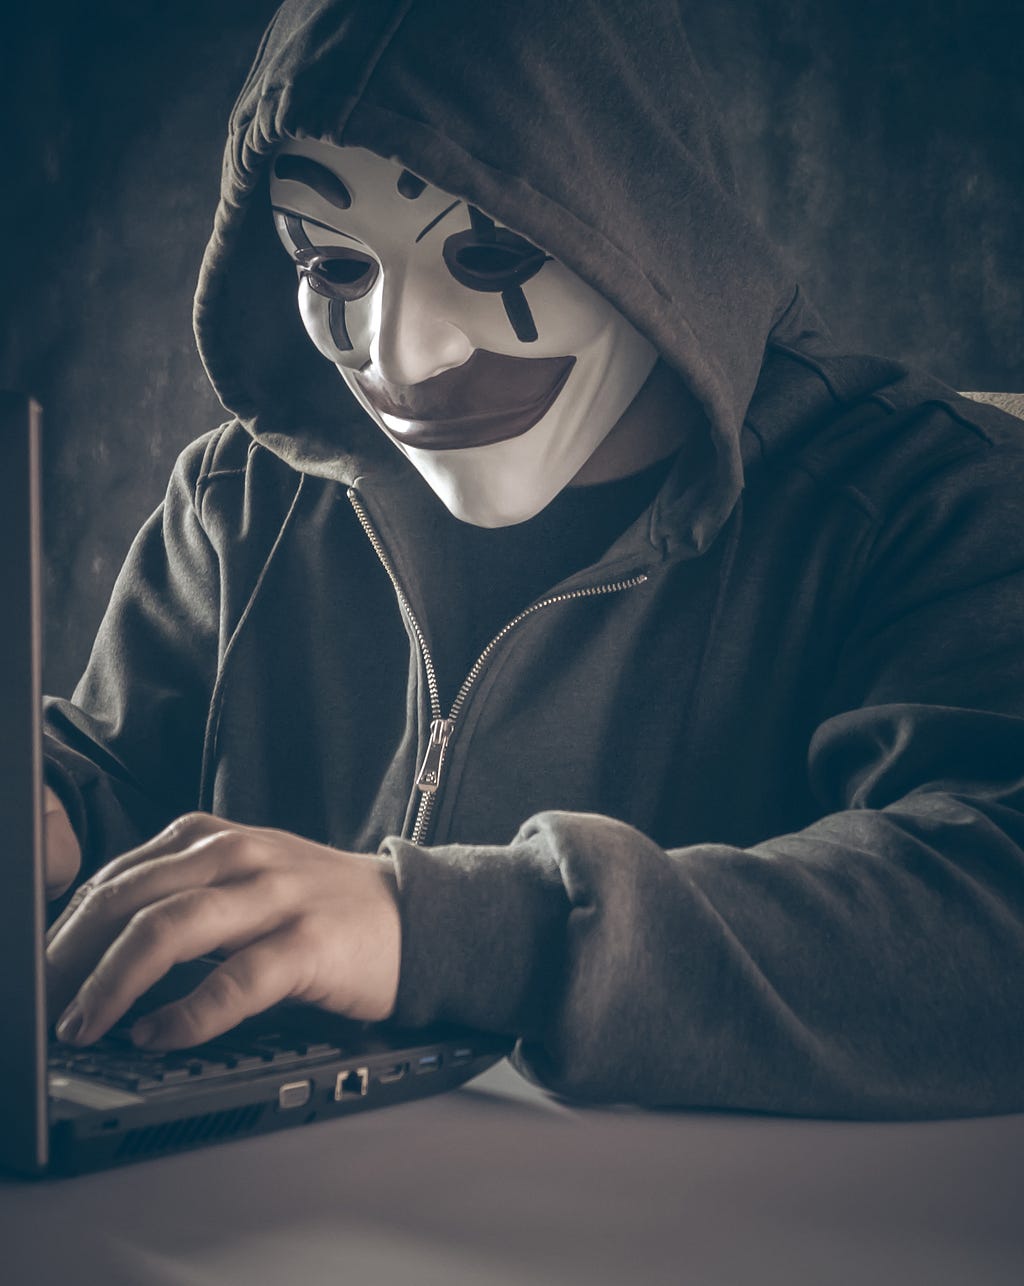 Hooded figure wearing a ‘Joker’ mask typing in front of a computer.